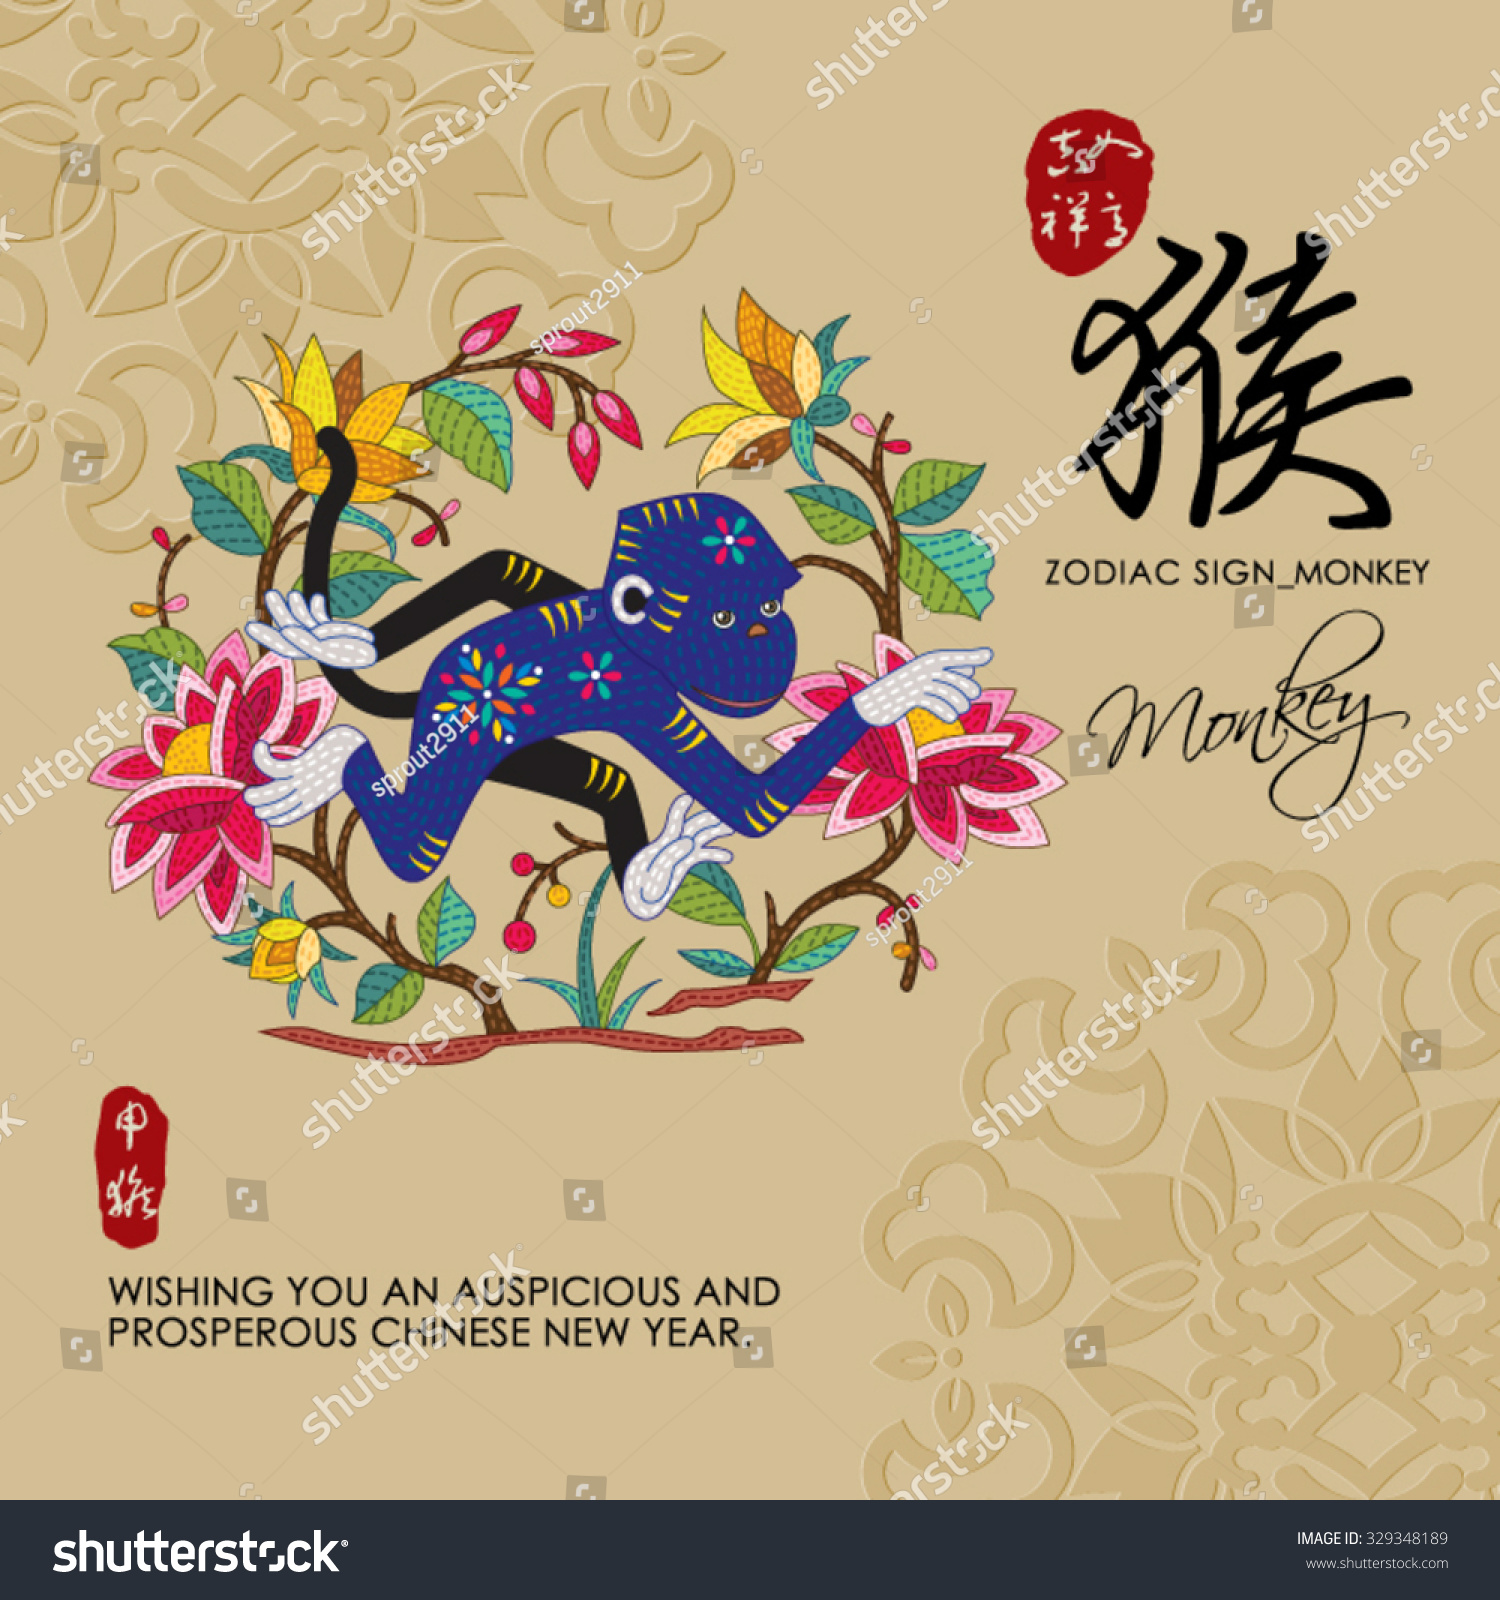 SVG of 12 Chinese Zodiac Signs of Monkey with chinese calligraphy text and the translation. Auspicious Chinese Seal (top) Good luck and happiness to you and (bottom) Monkey. svg